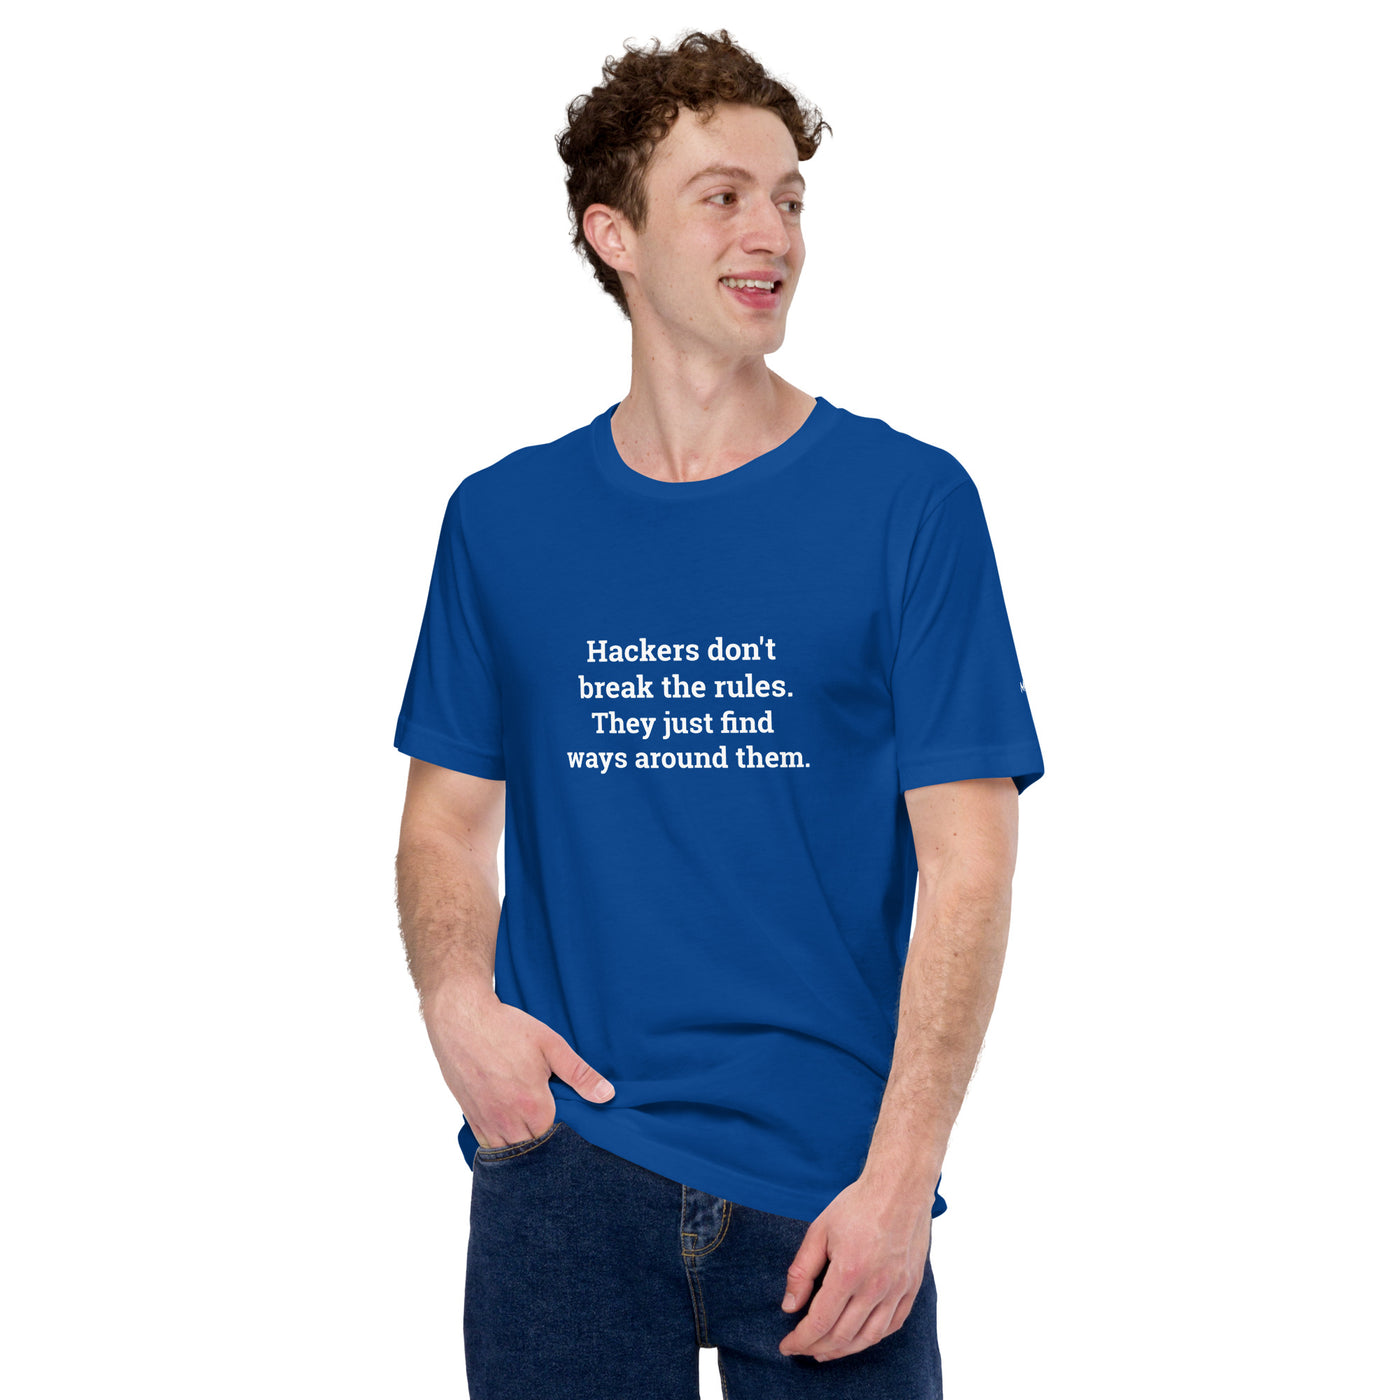 Hackers don't break the rules, they just find ways around them - Unisex t-shirt